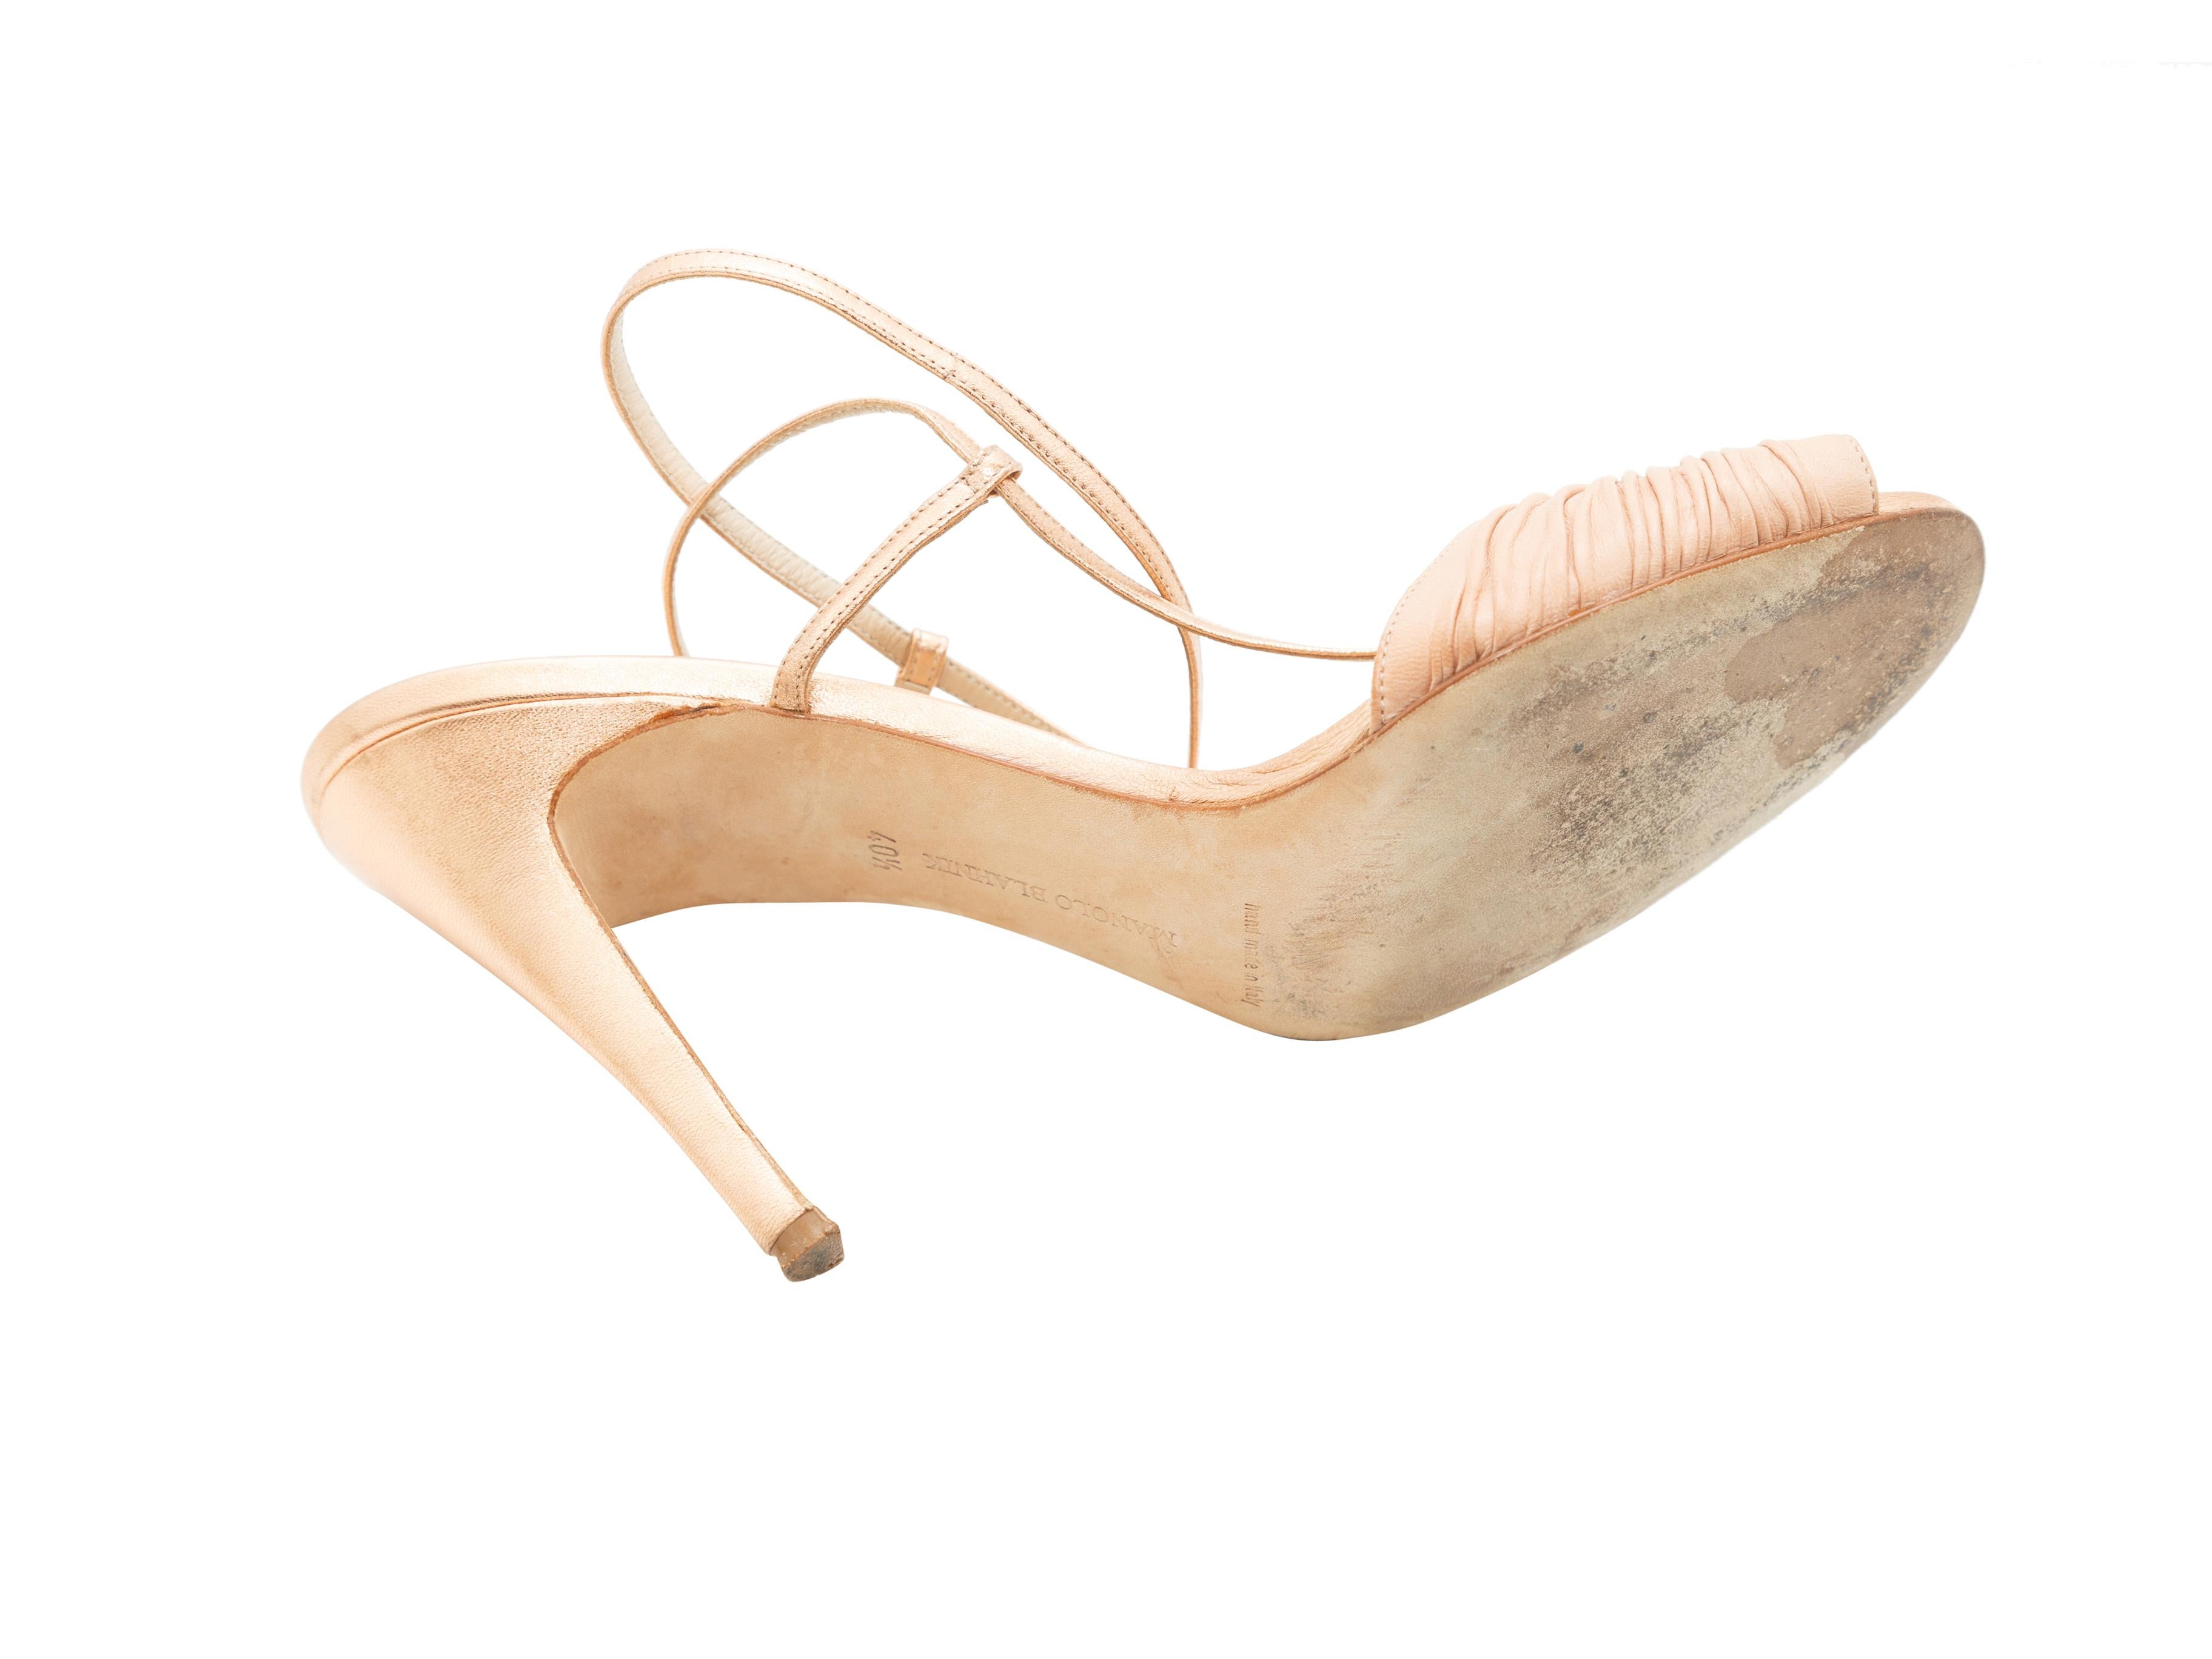 Product details:  Nude and copper leather strappy sandals by Manolo Blahnik.  Adjustable ankle strap.  Peep toe.  4.25